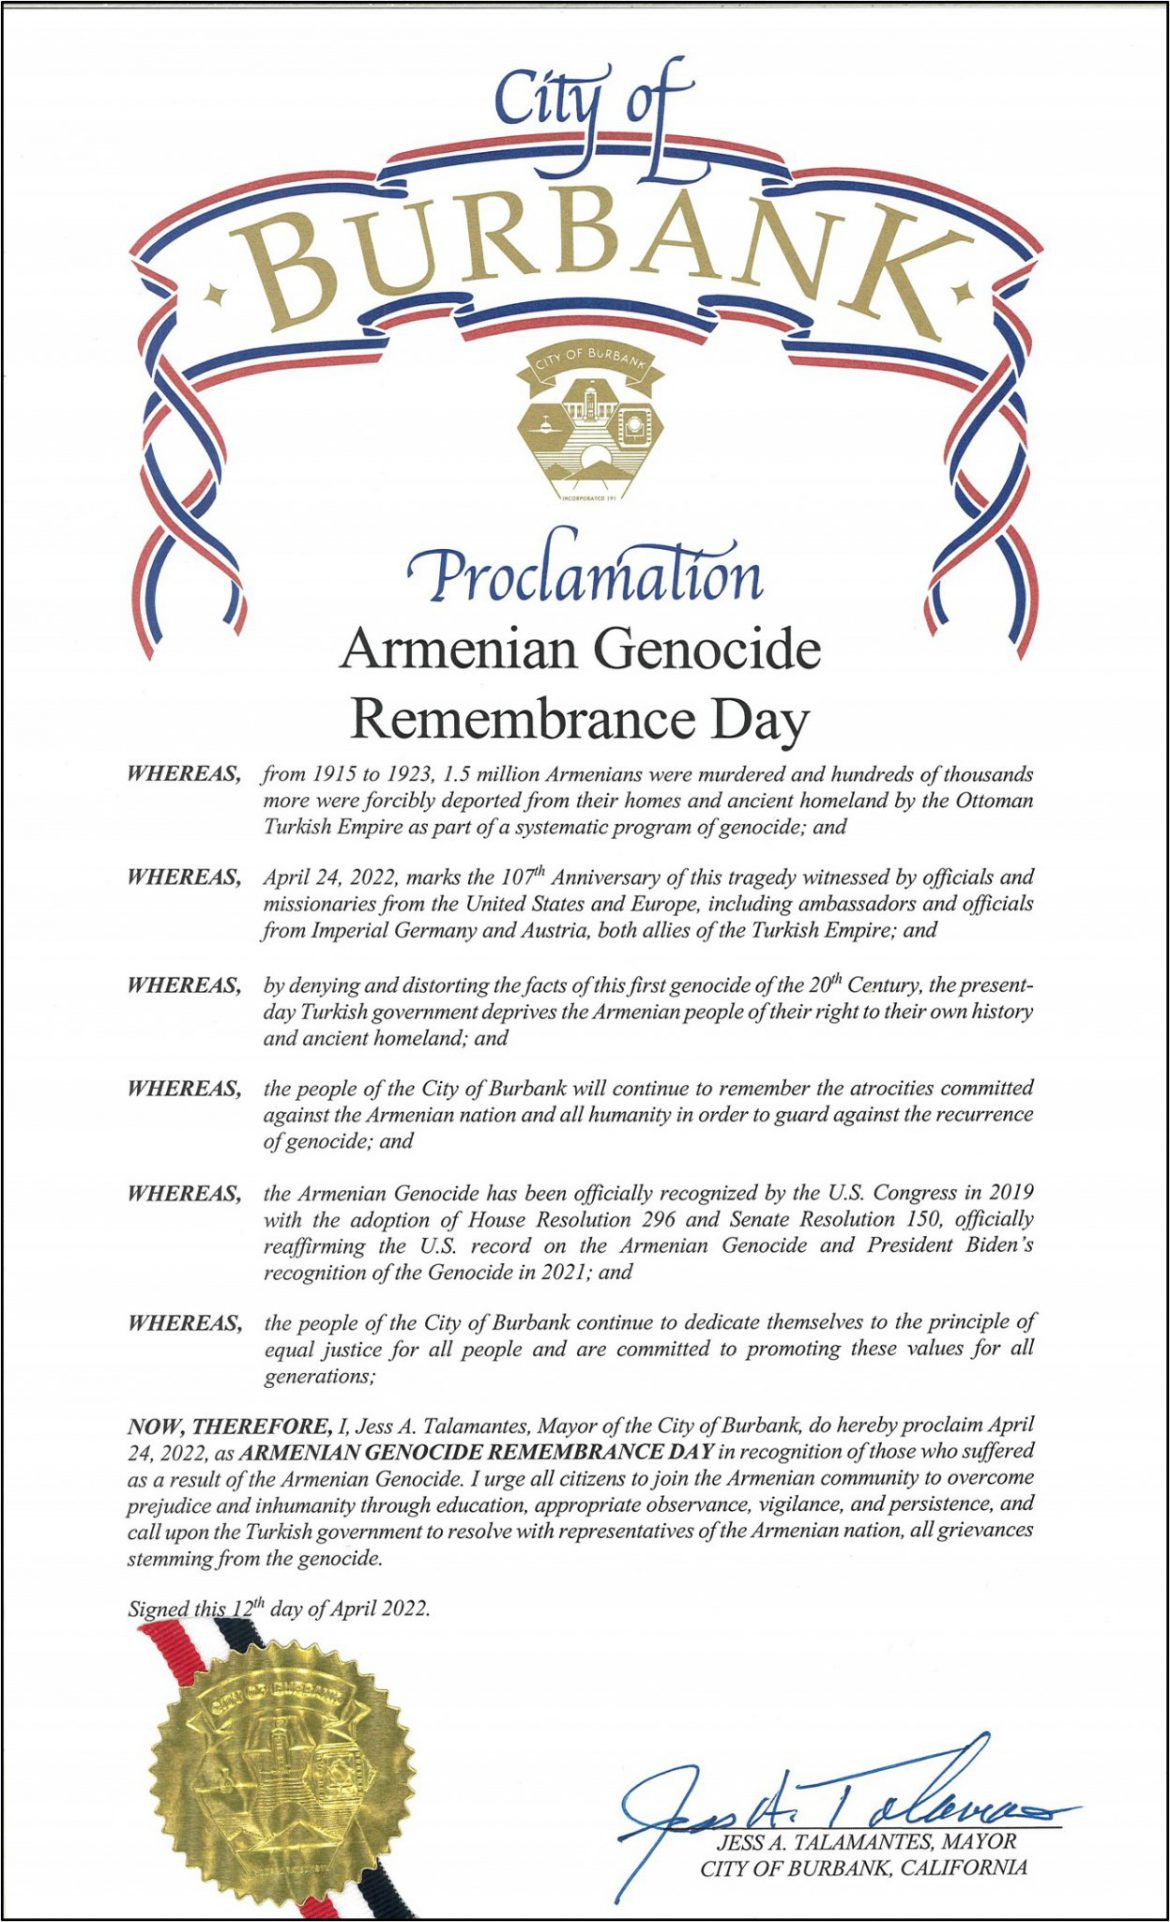 City of Burbank Issues Armenian Genocide Proclamation